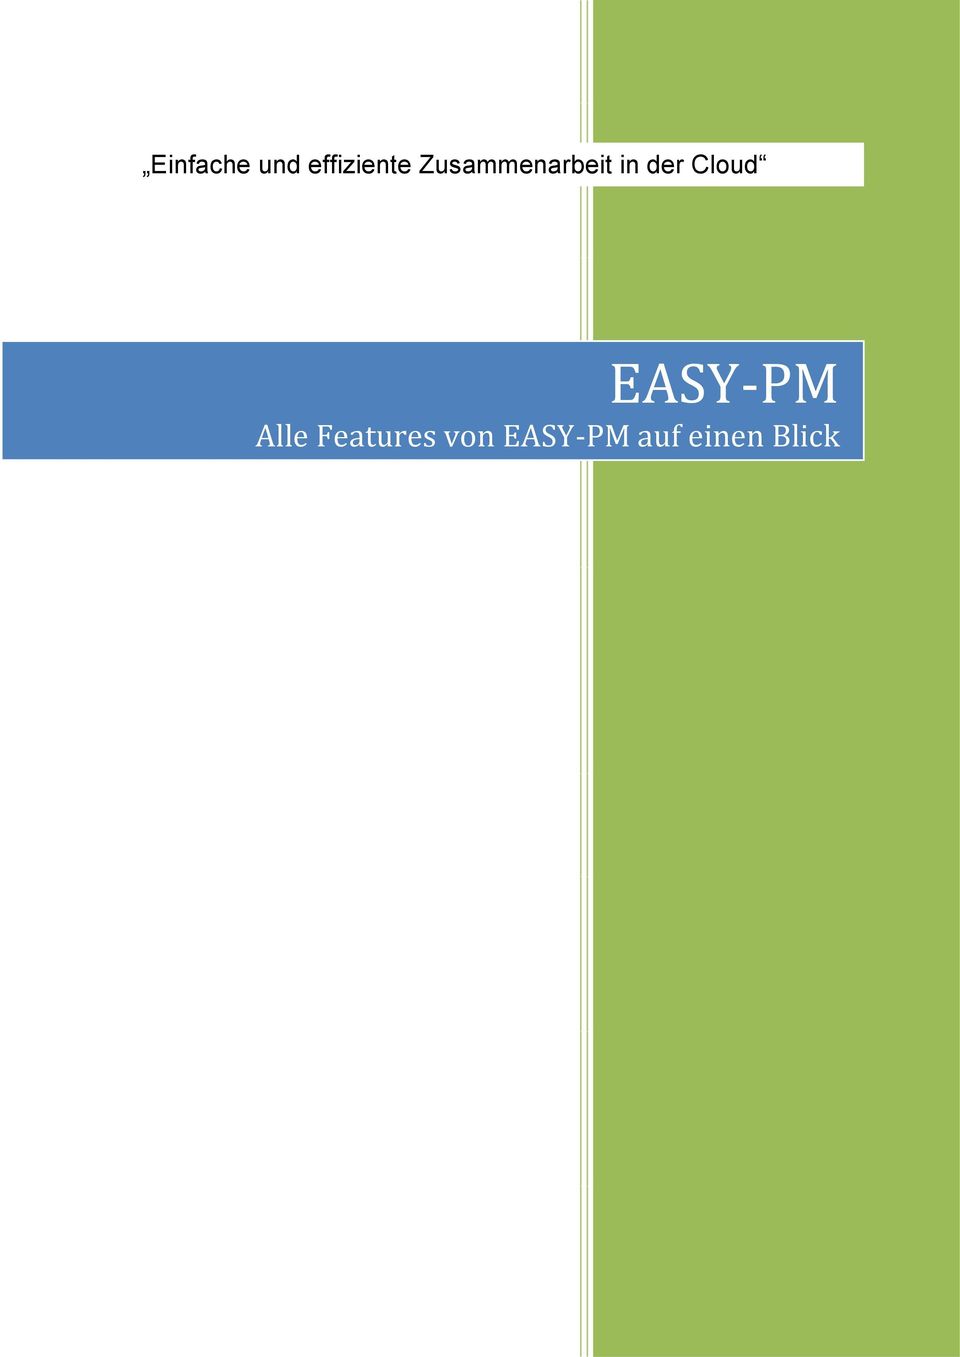 Cloud EASY-PM Alle